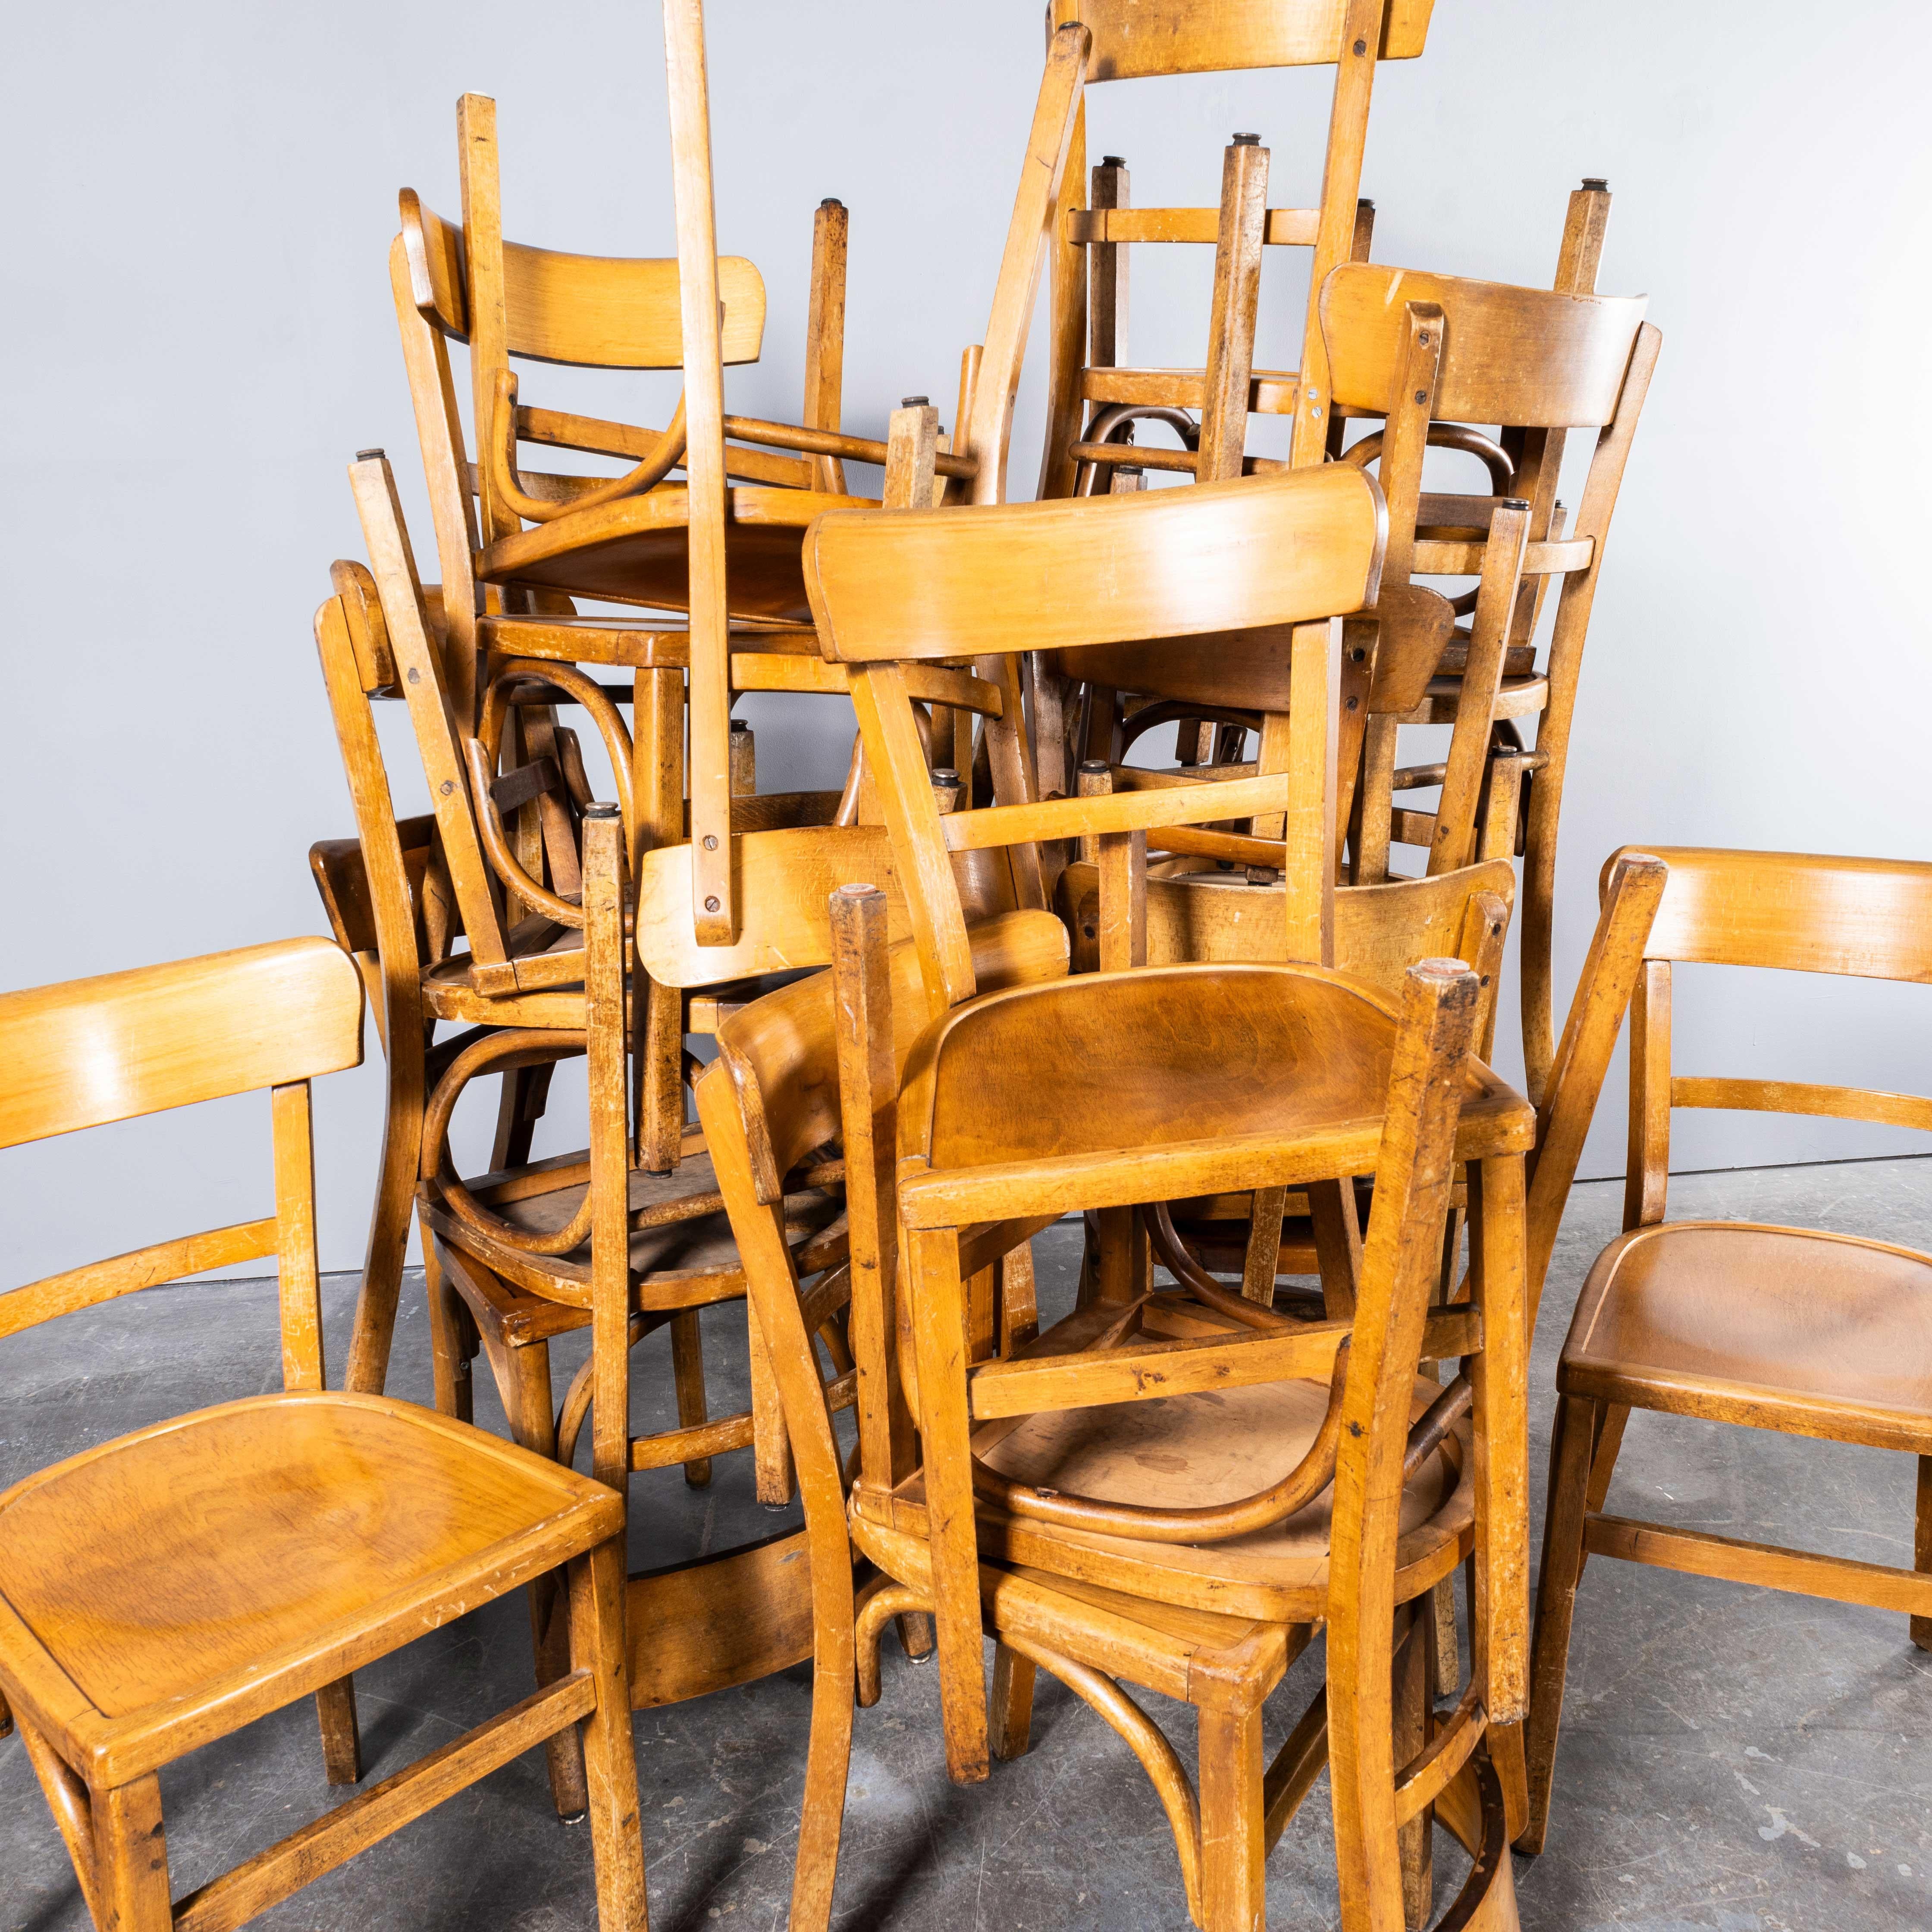 1950’s Standard Single Bar Back Farmhouse French Mixed Dining Chairs – Good Quantities Available
1950’s Standard Single Bar Back Farmhouse French Mixed Dining Chairs – Good Quantities Available. This listing is for what we call a ‘standard shape’ of